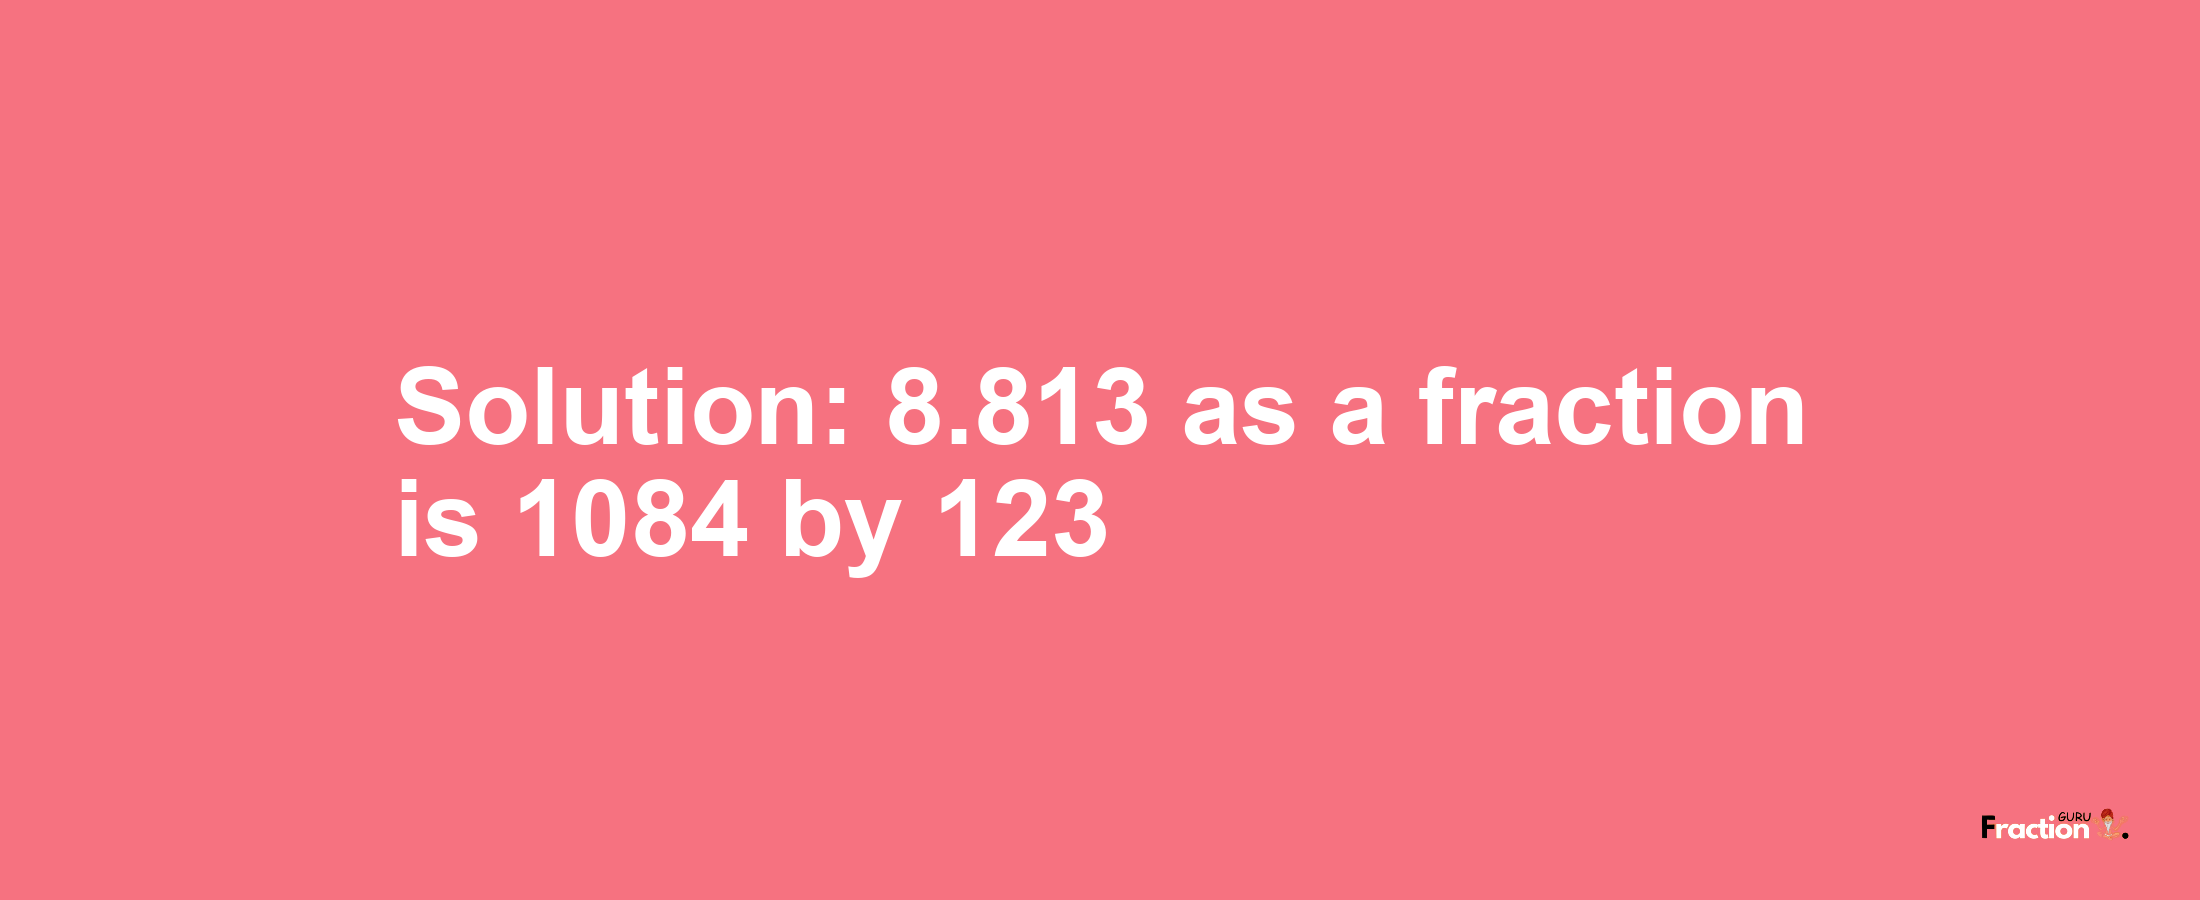 Solution:8.813 as a fraction is 1084/123